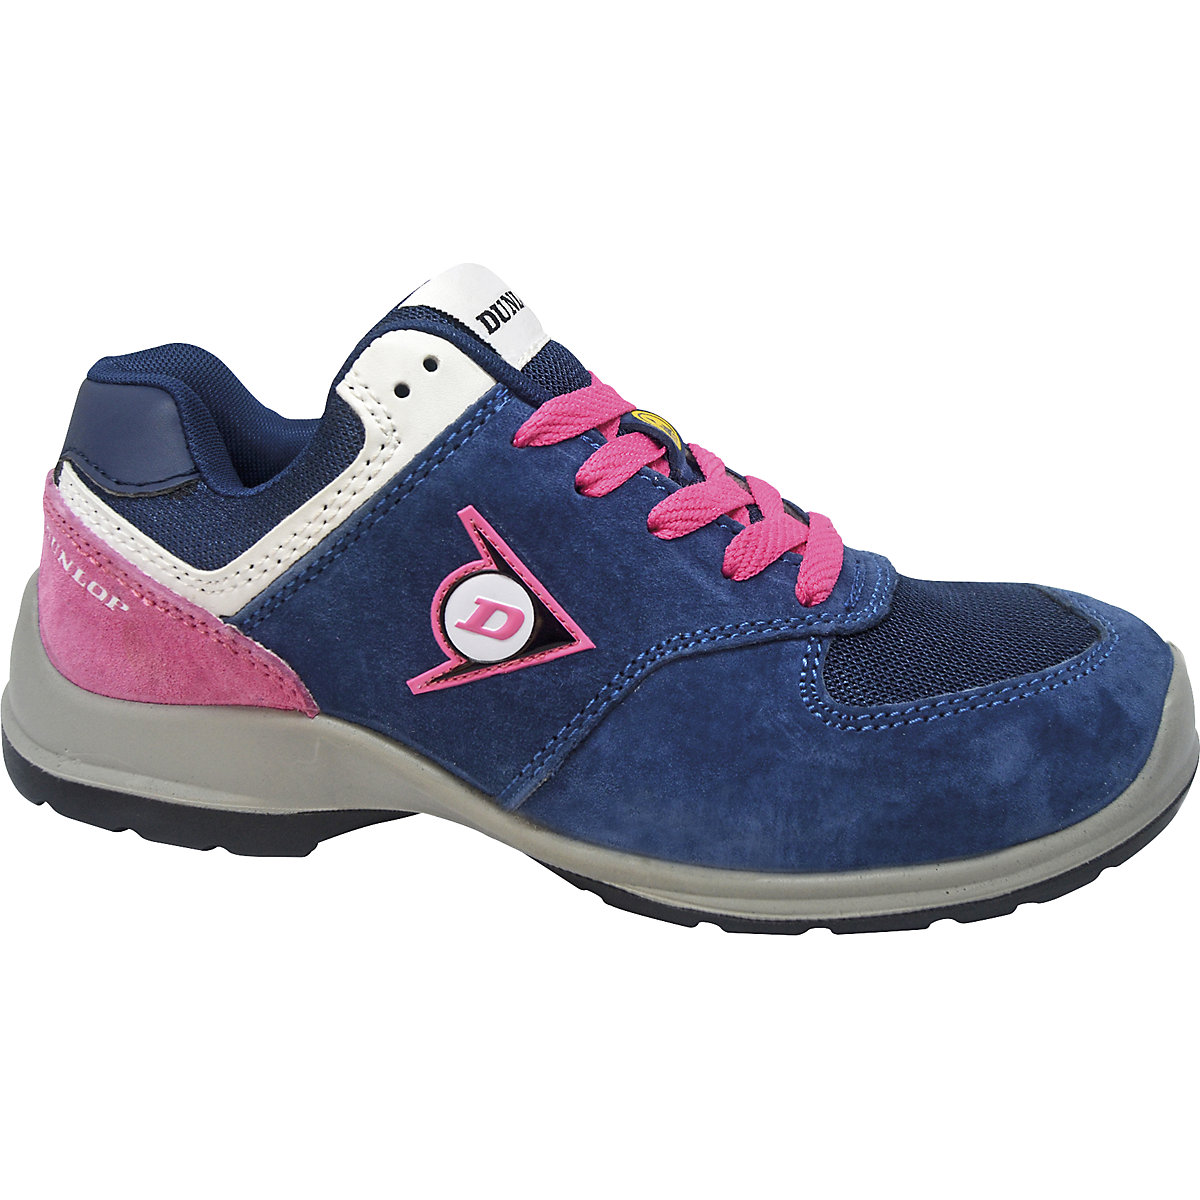 LADY ARROW S3 safety lace-up shoes – DUNLOP